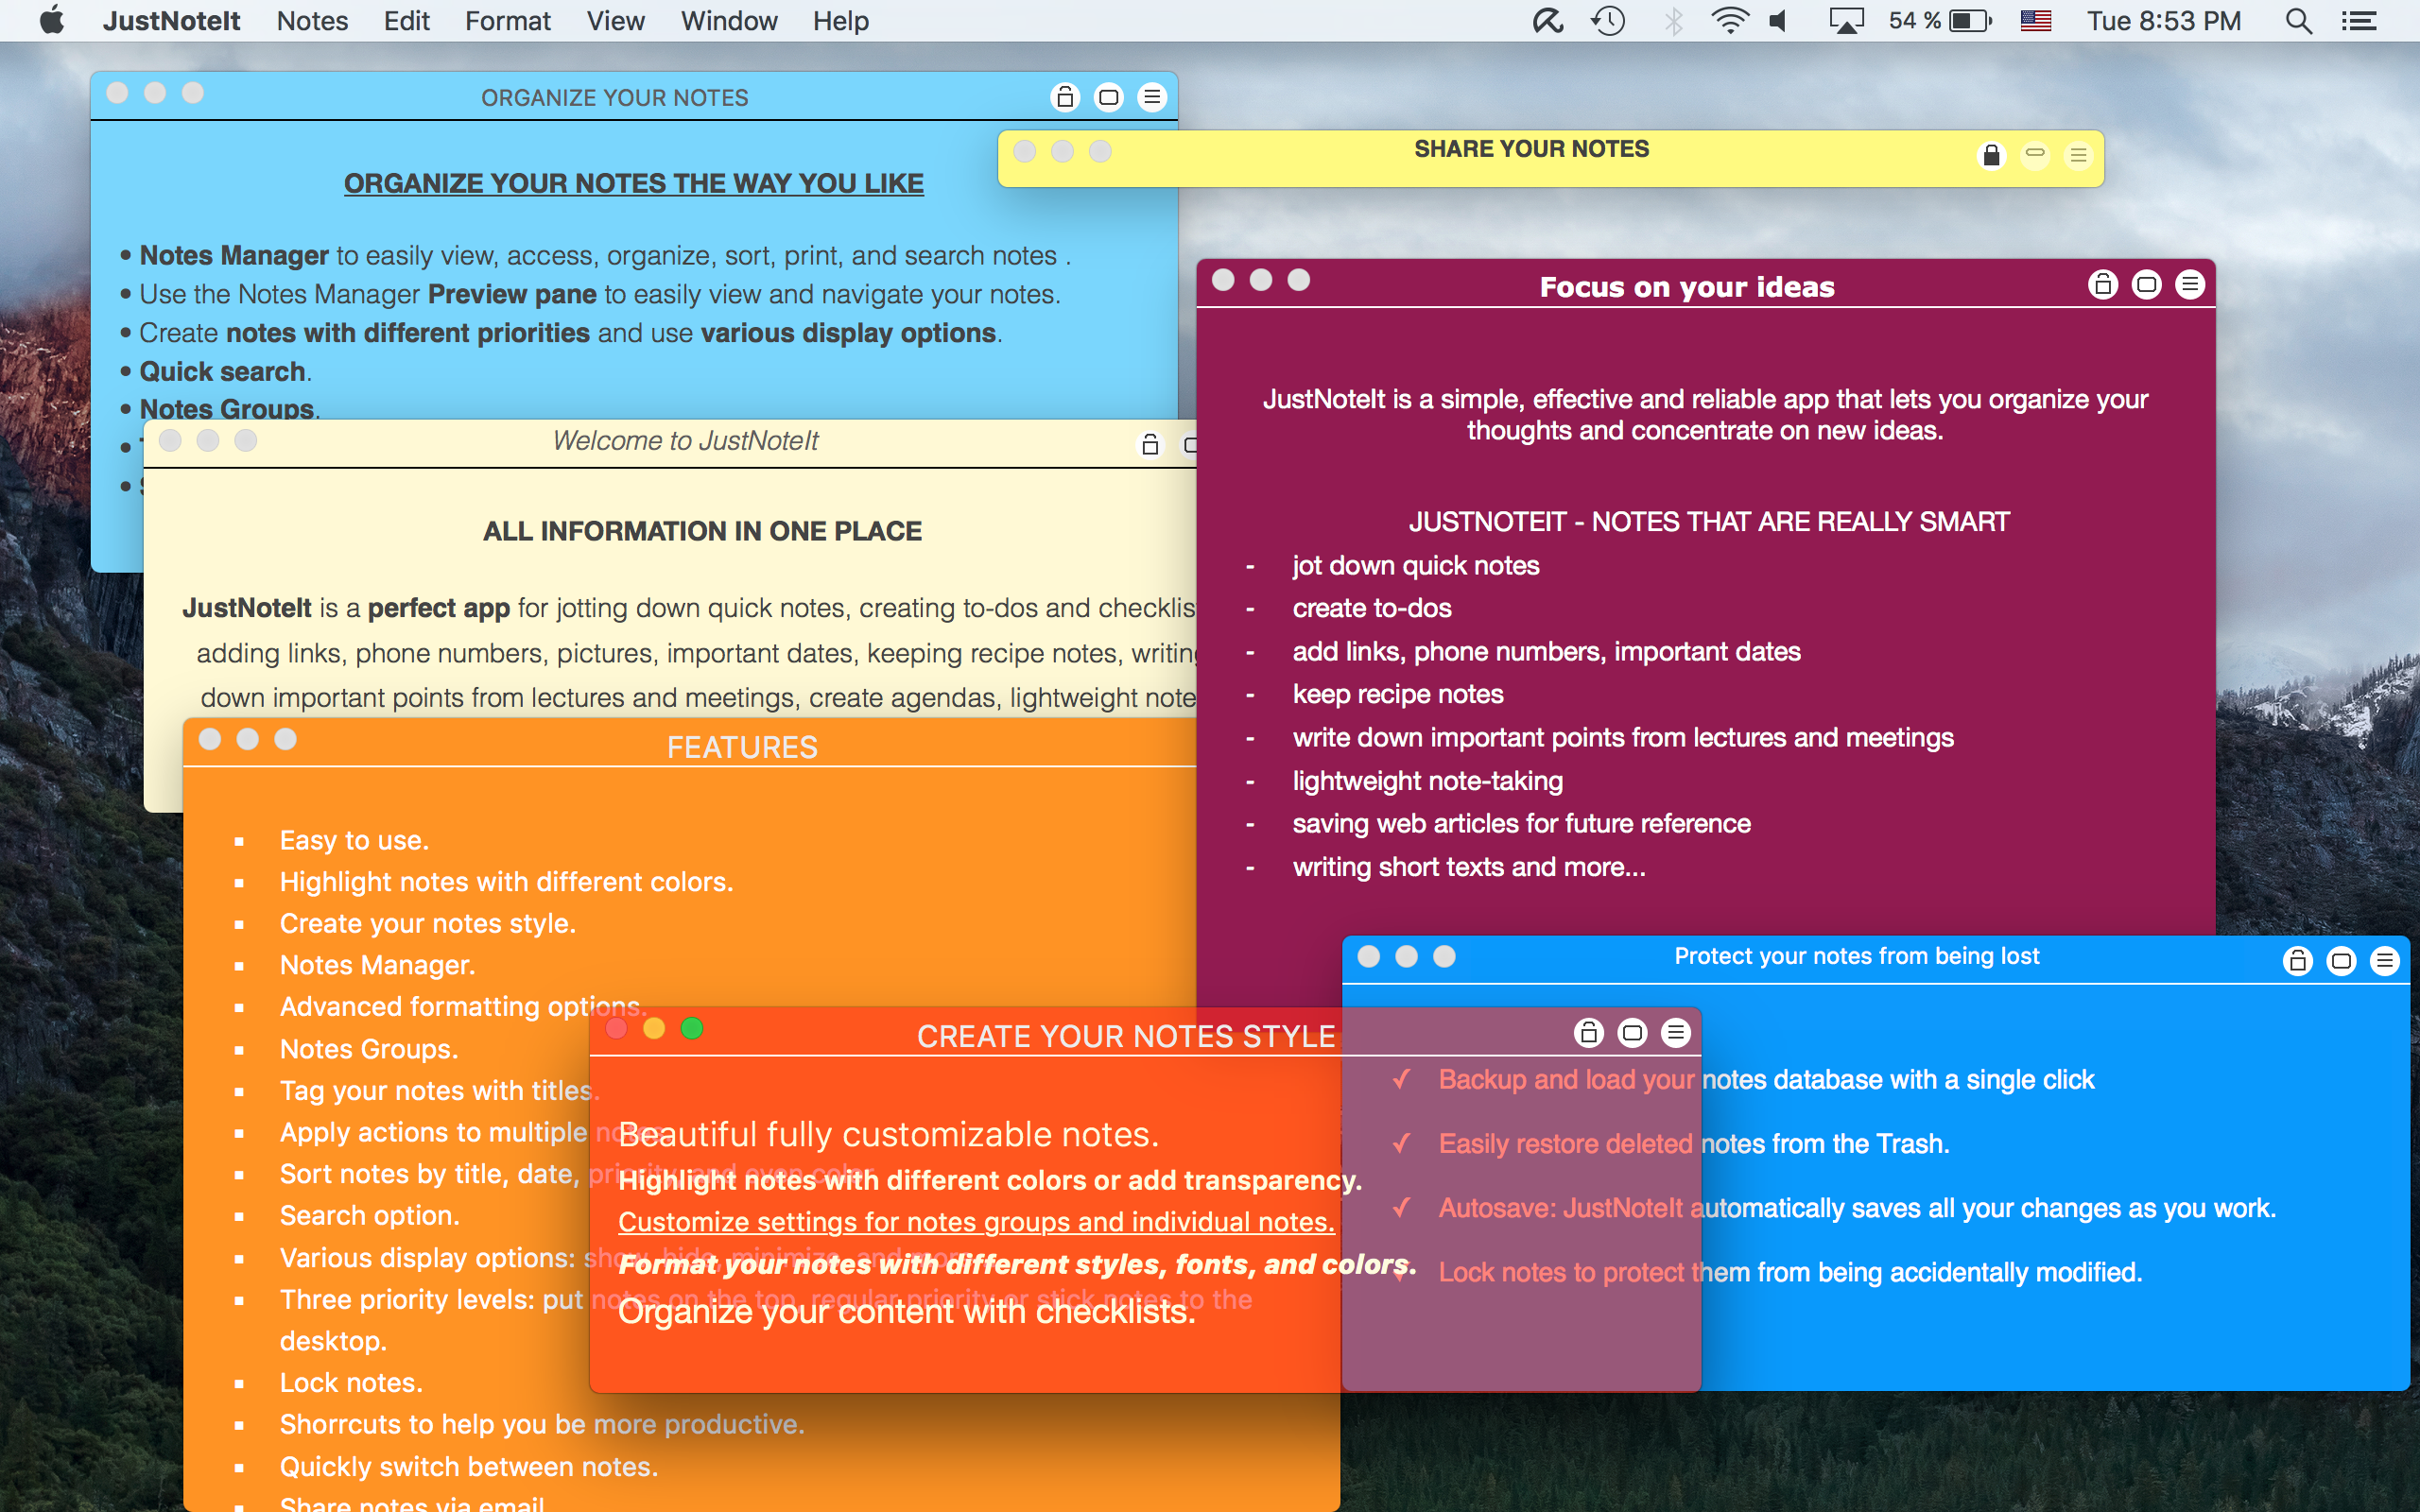 Organize notes in a way that works best for you